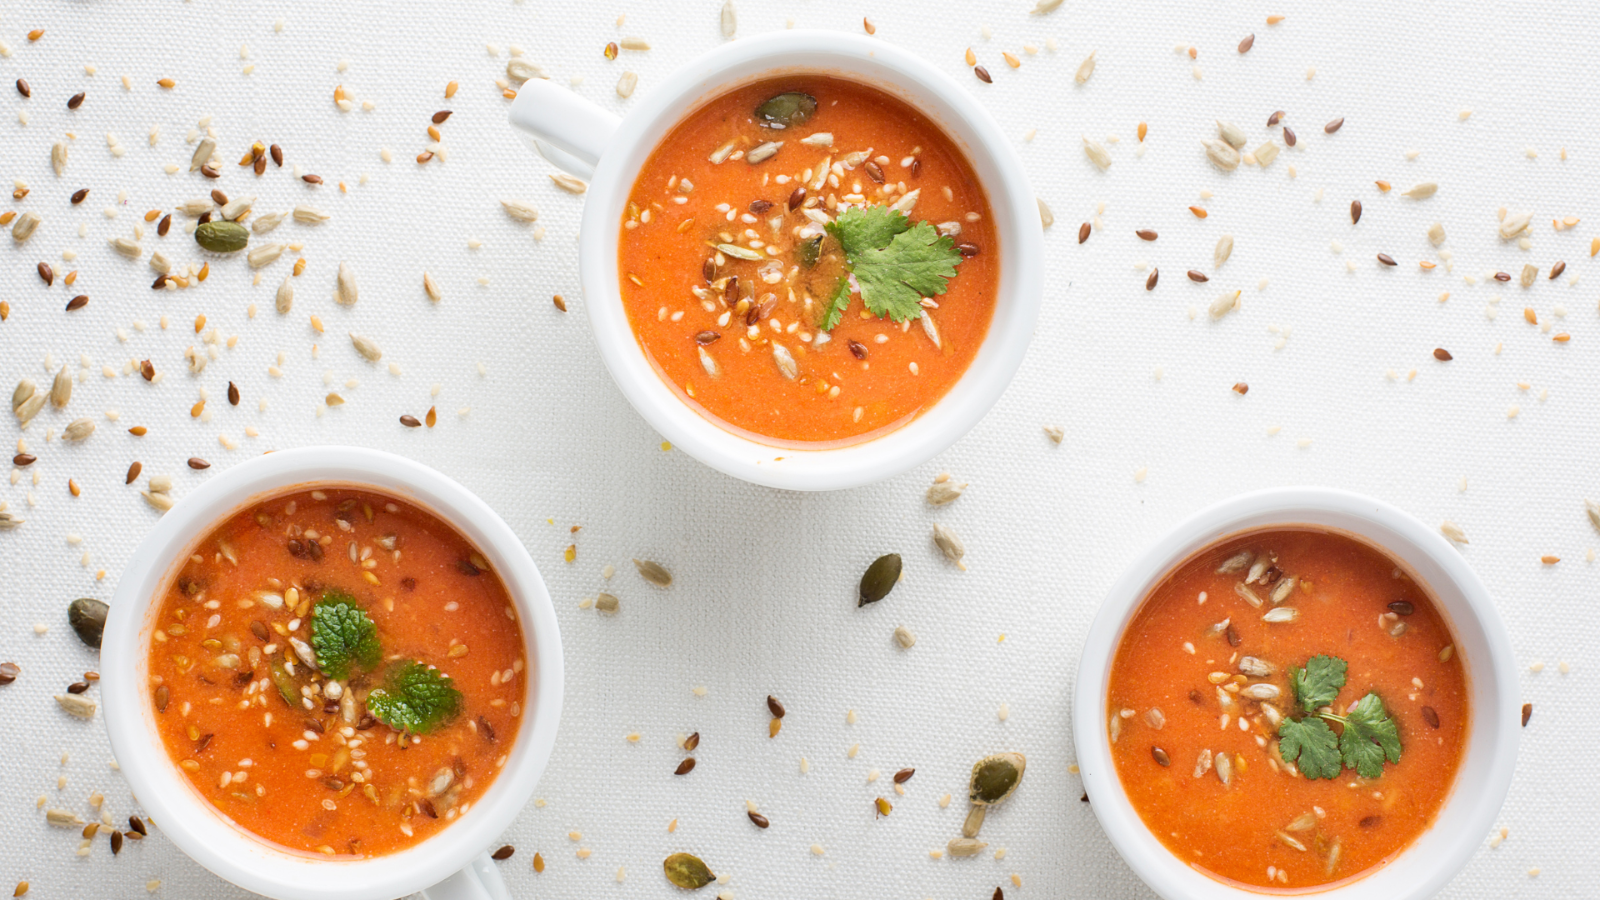 Image of Tomato Soup with Crunchy Seed Topping